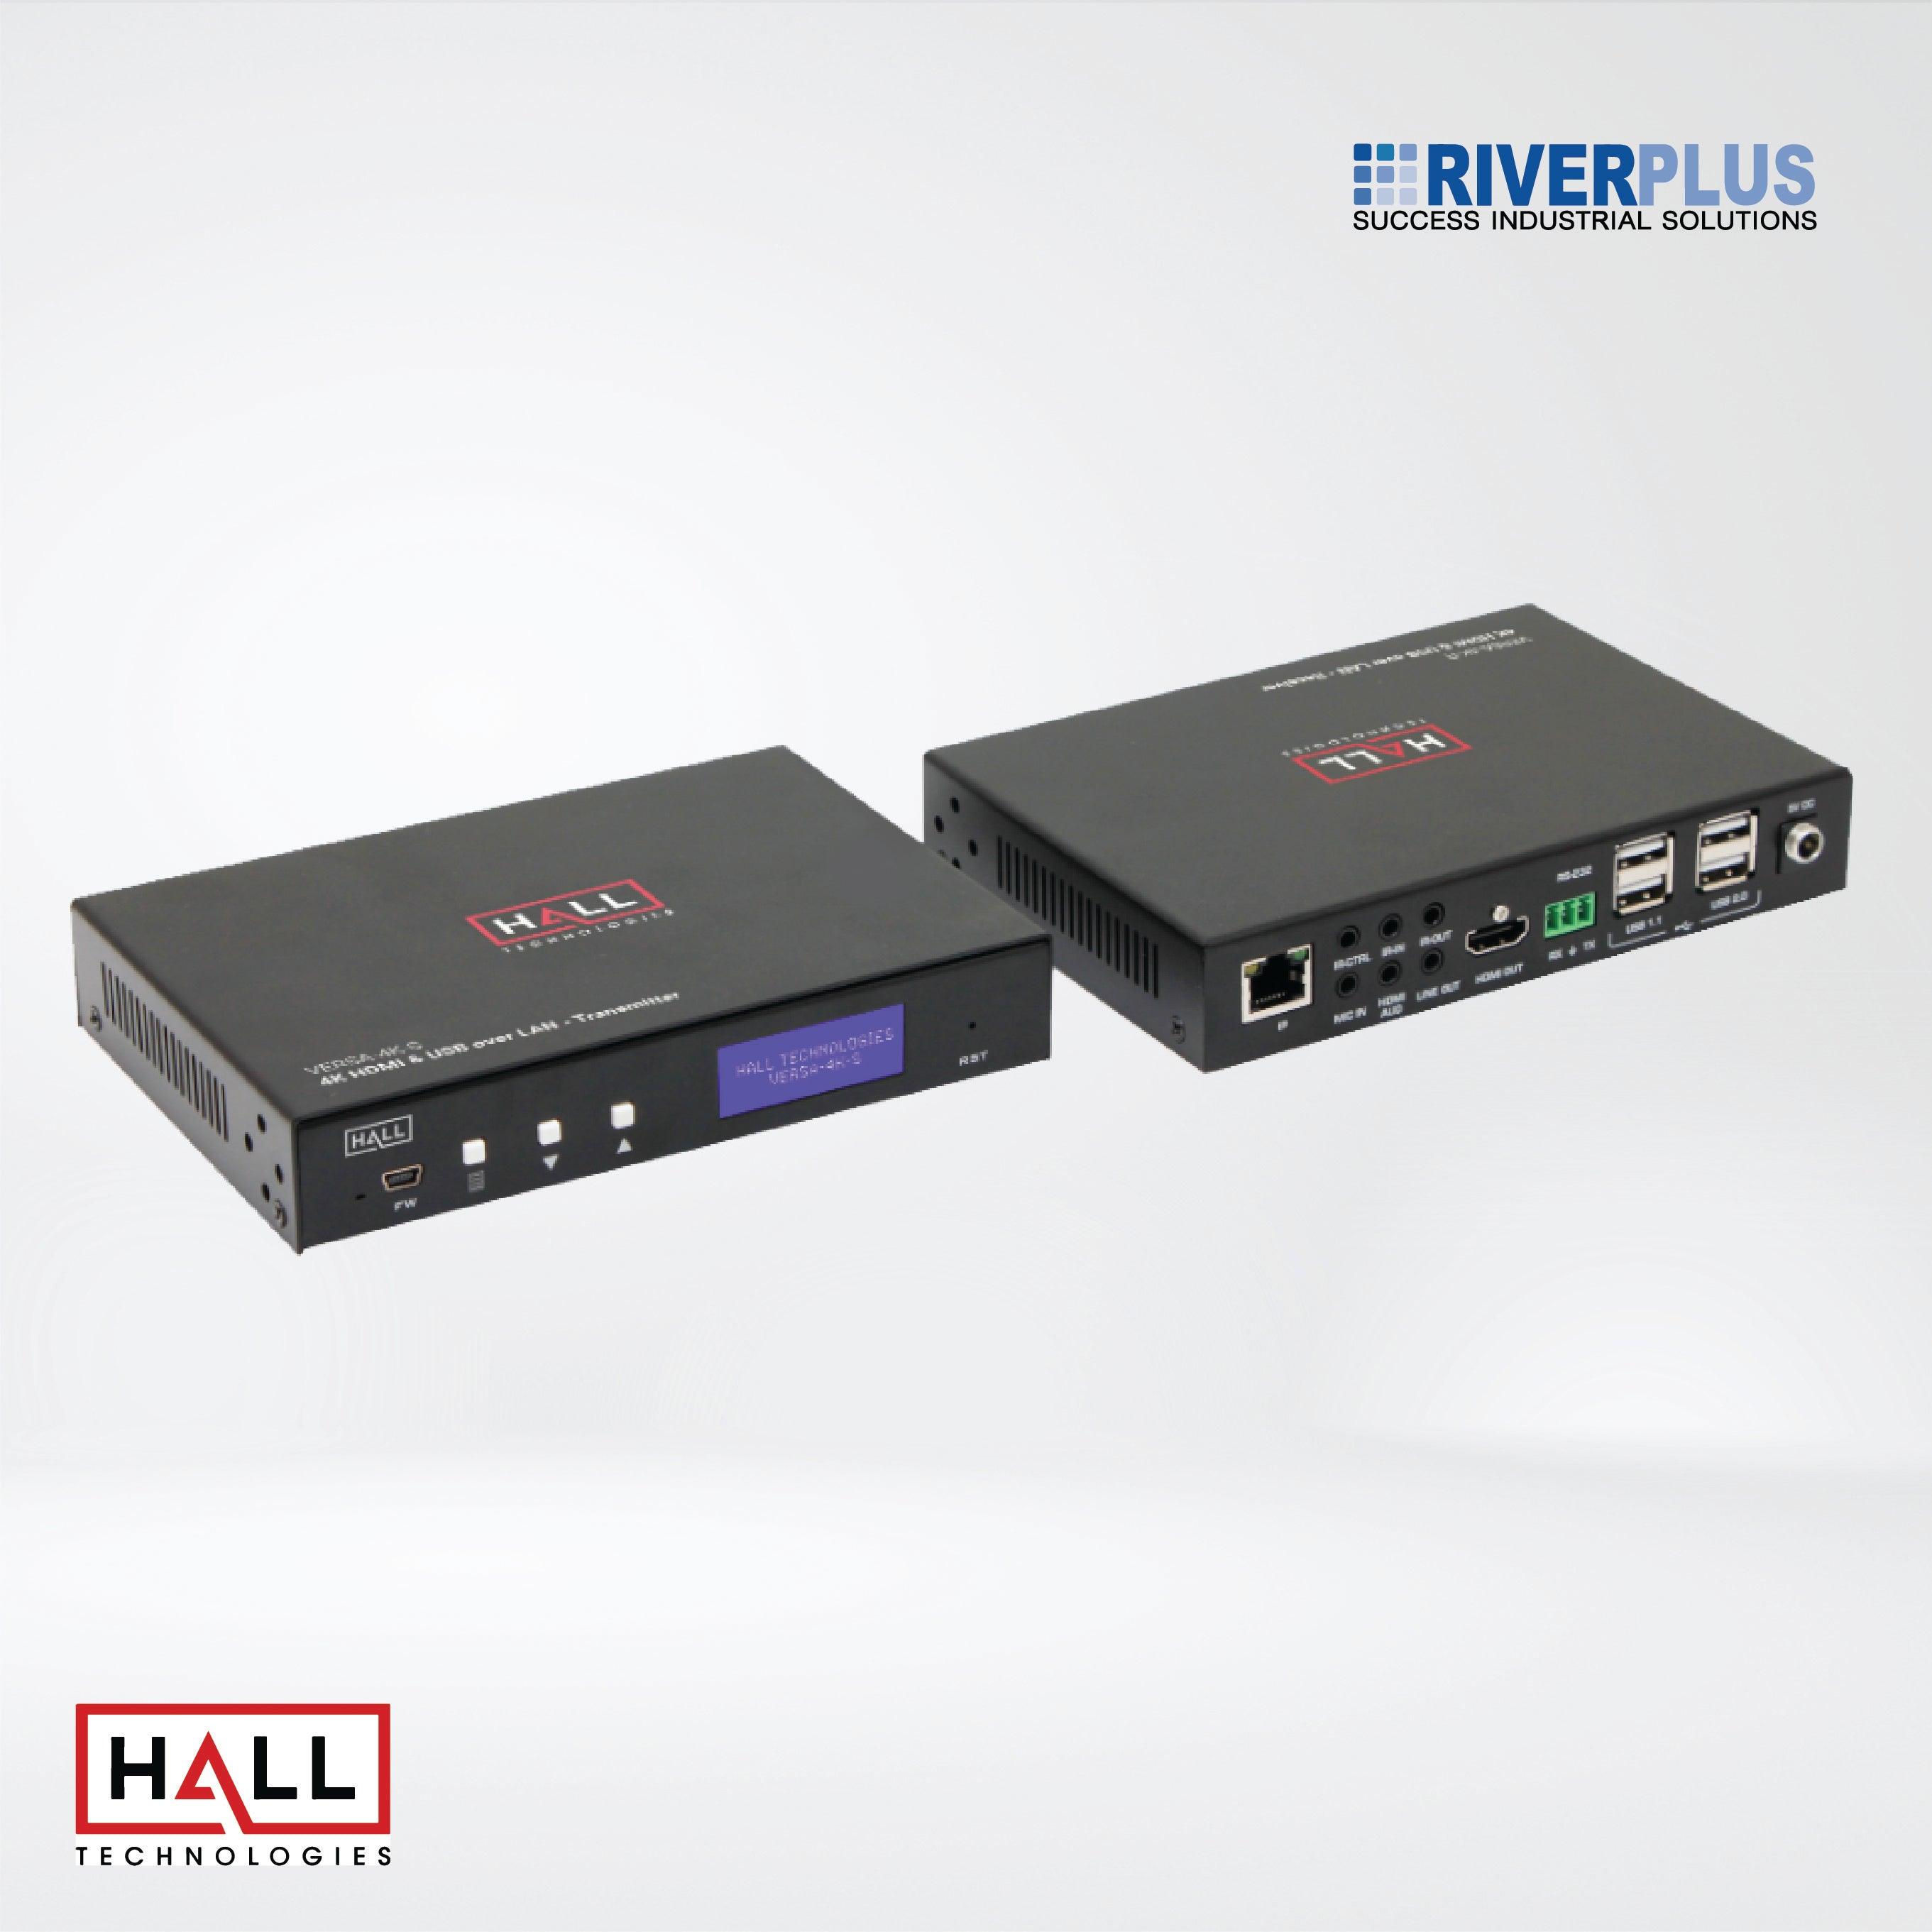 VERSA-4K-S 4K Video & USB Extension for Point-to-Point or Matrix over IP - Riverplus